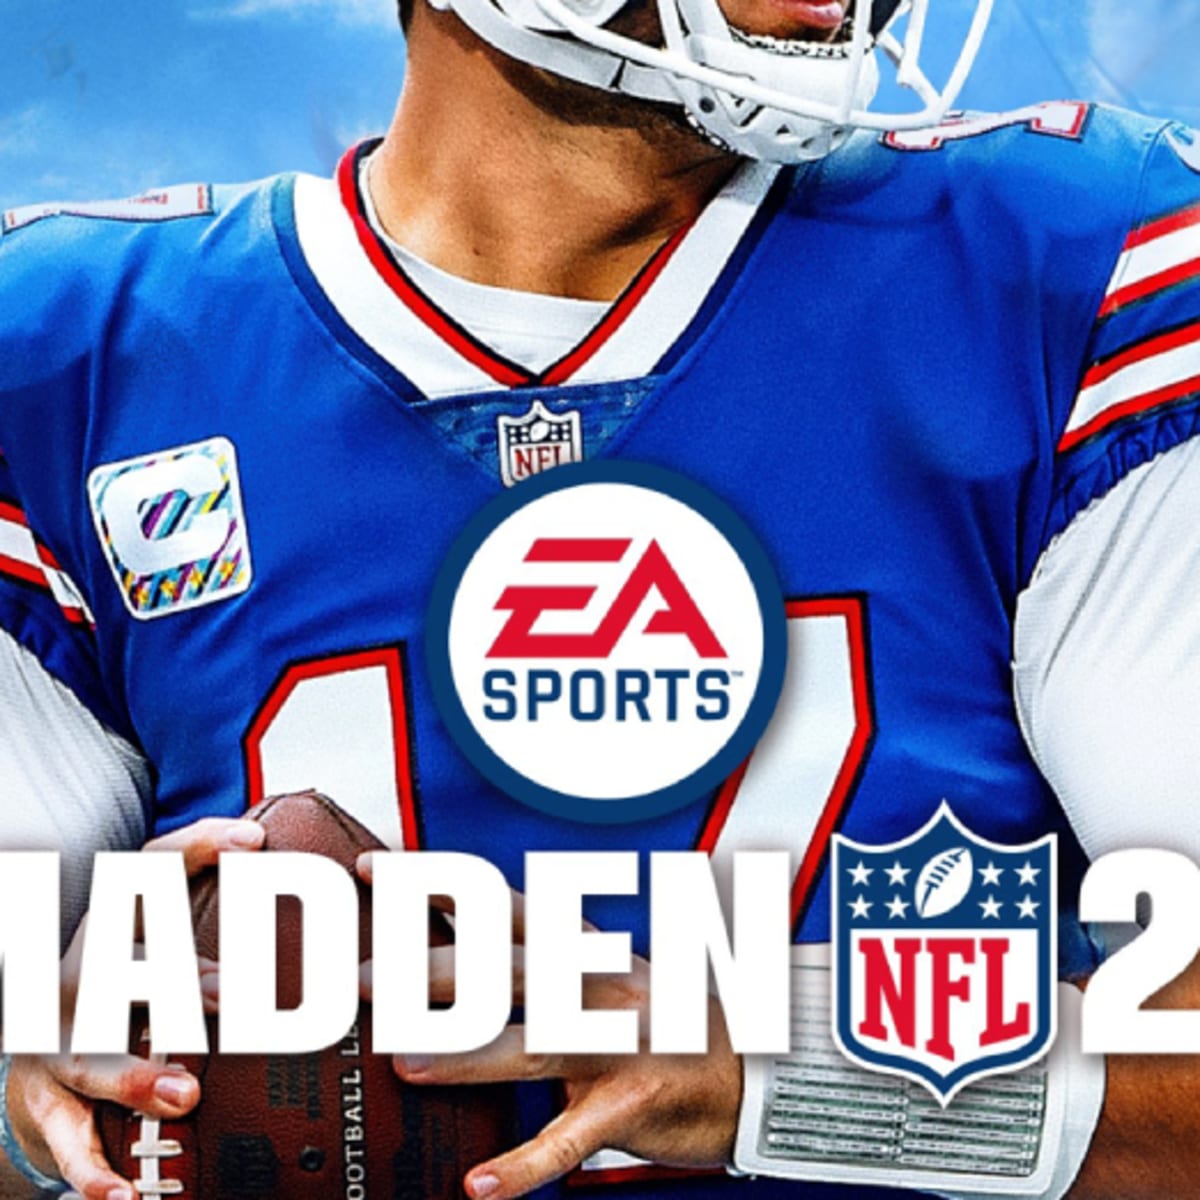 2023 madden cover